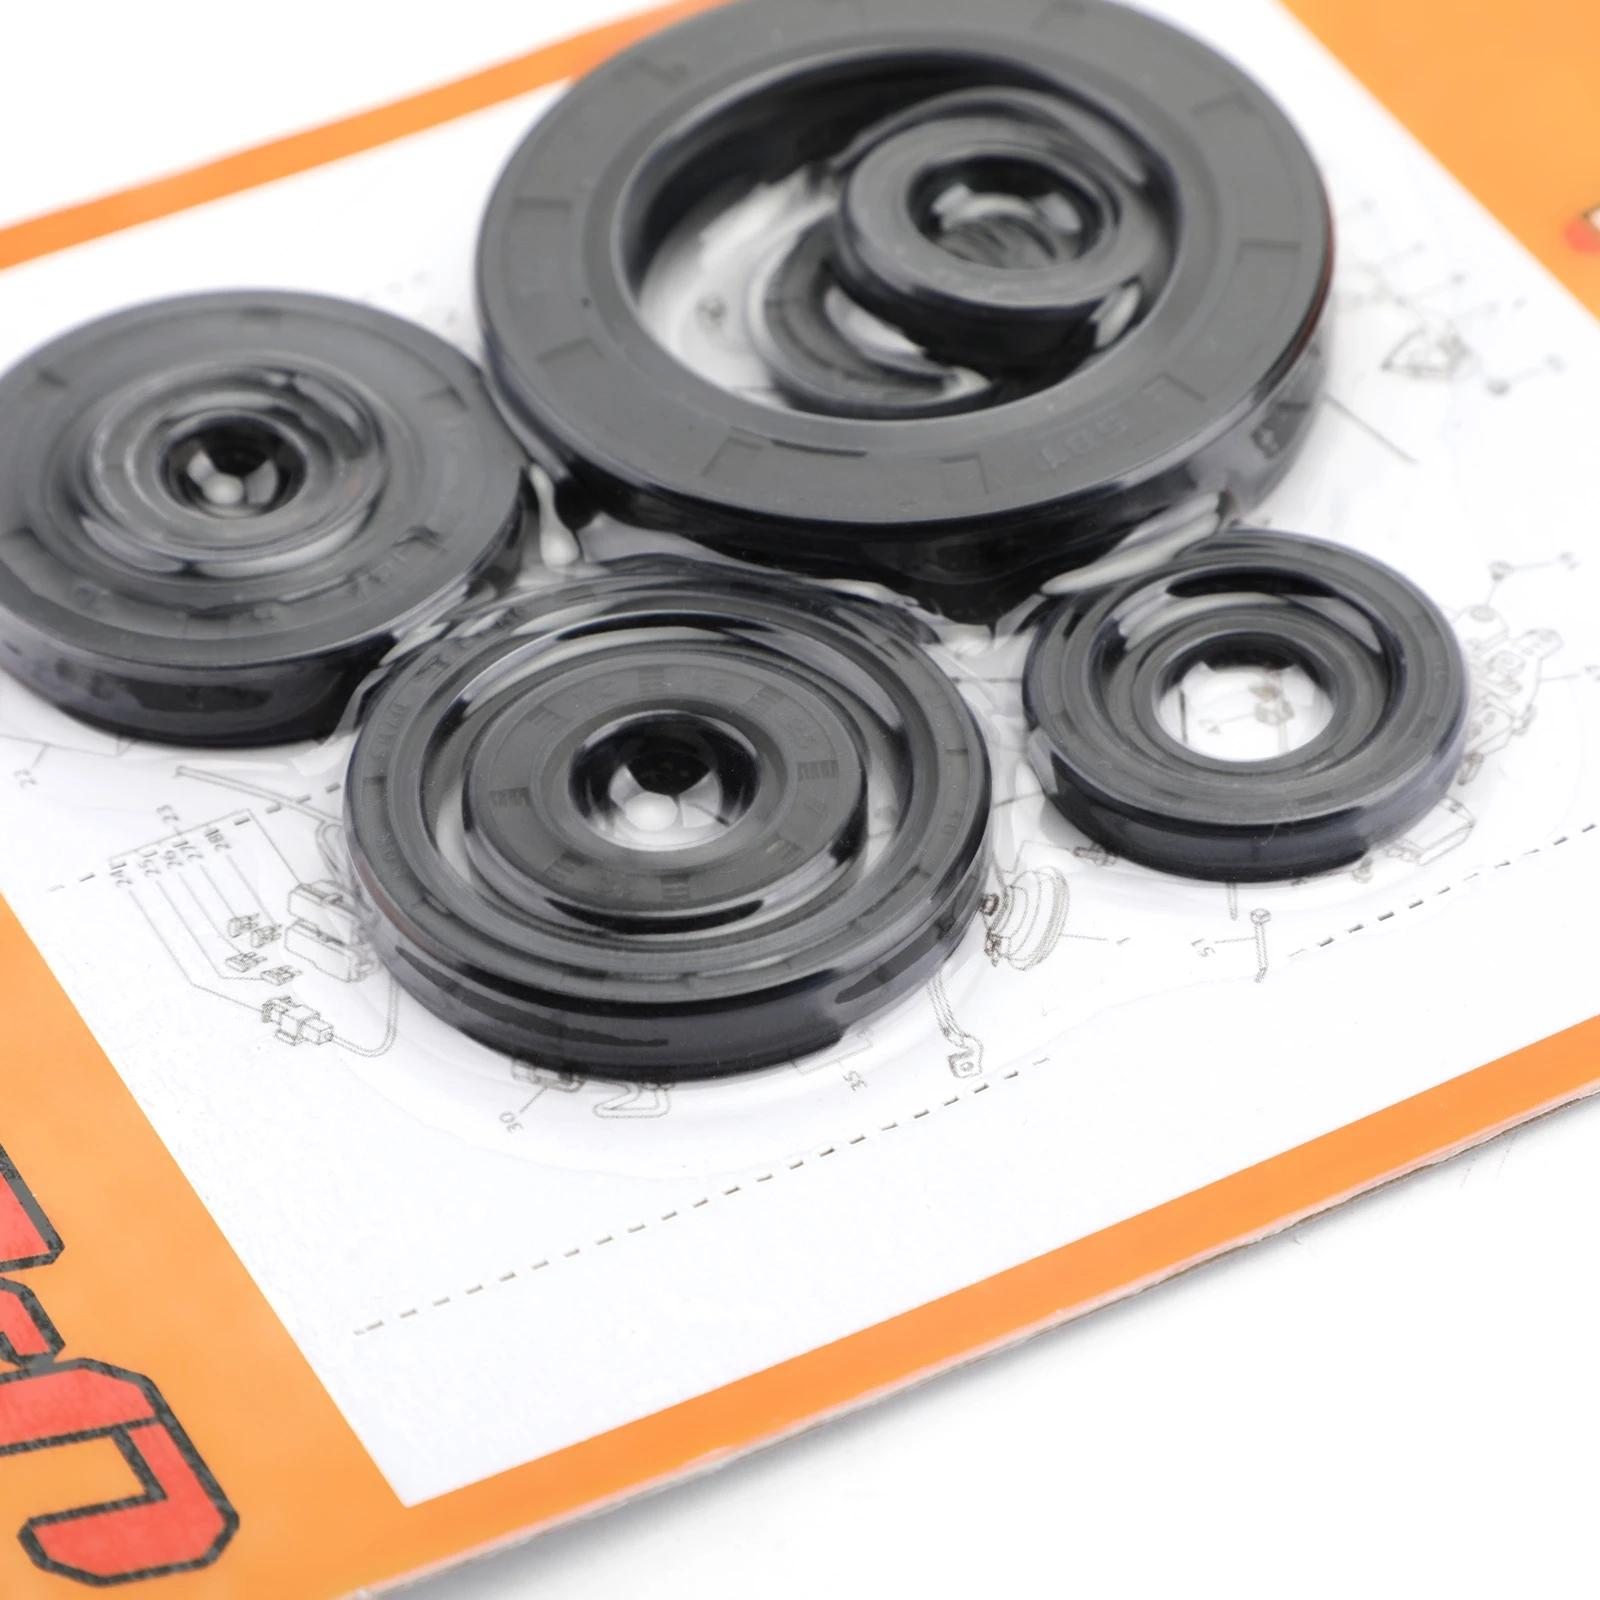 Areyourshop for Honda CR250R CR250 CR 250 250R 2002-2004 2003 Engine Oil Seal Kit Set 9pcs Seals Motorcycle Accessories